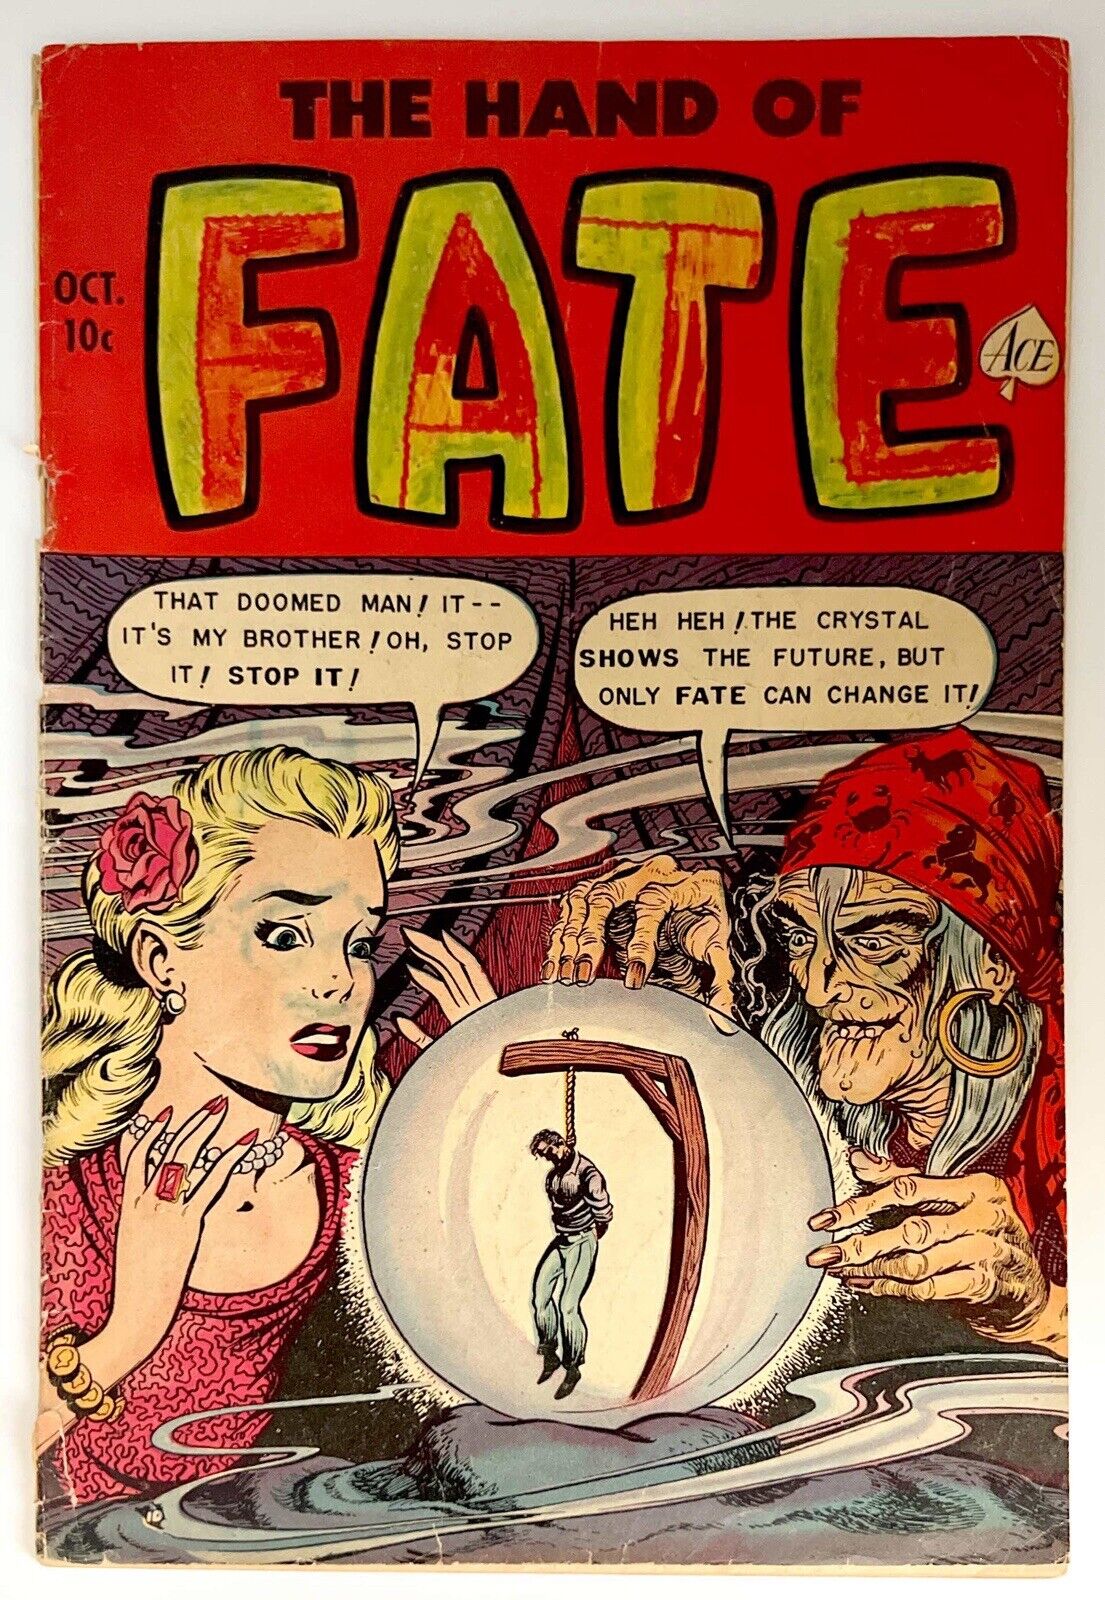 HAND OF FATE #13 ACE PERIODICALS 1952